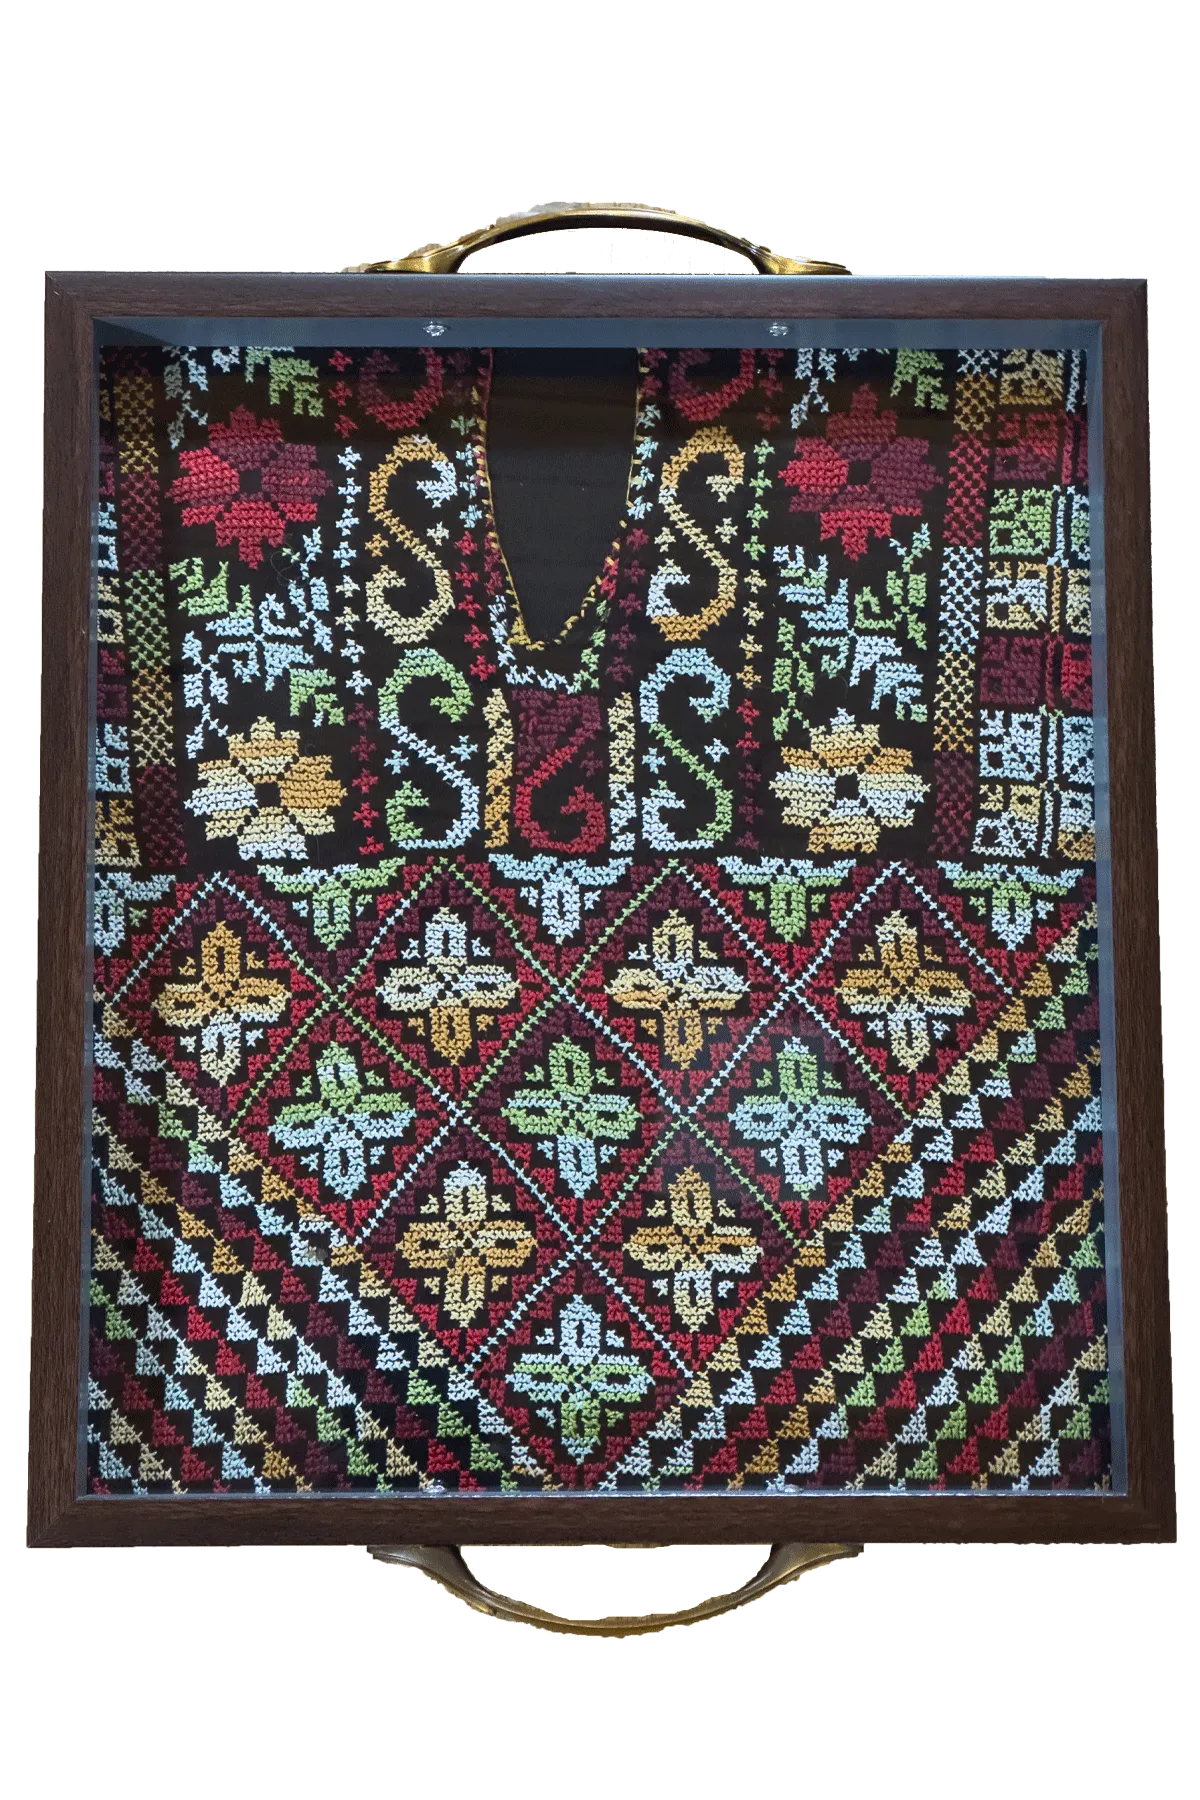 Hand-Embroidered tray